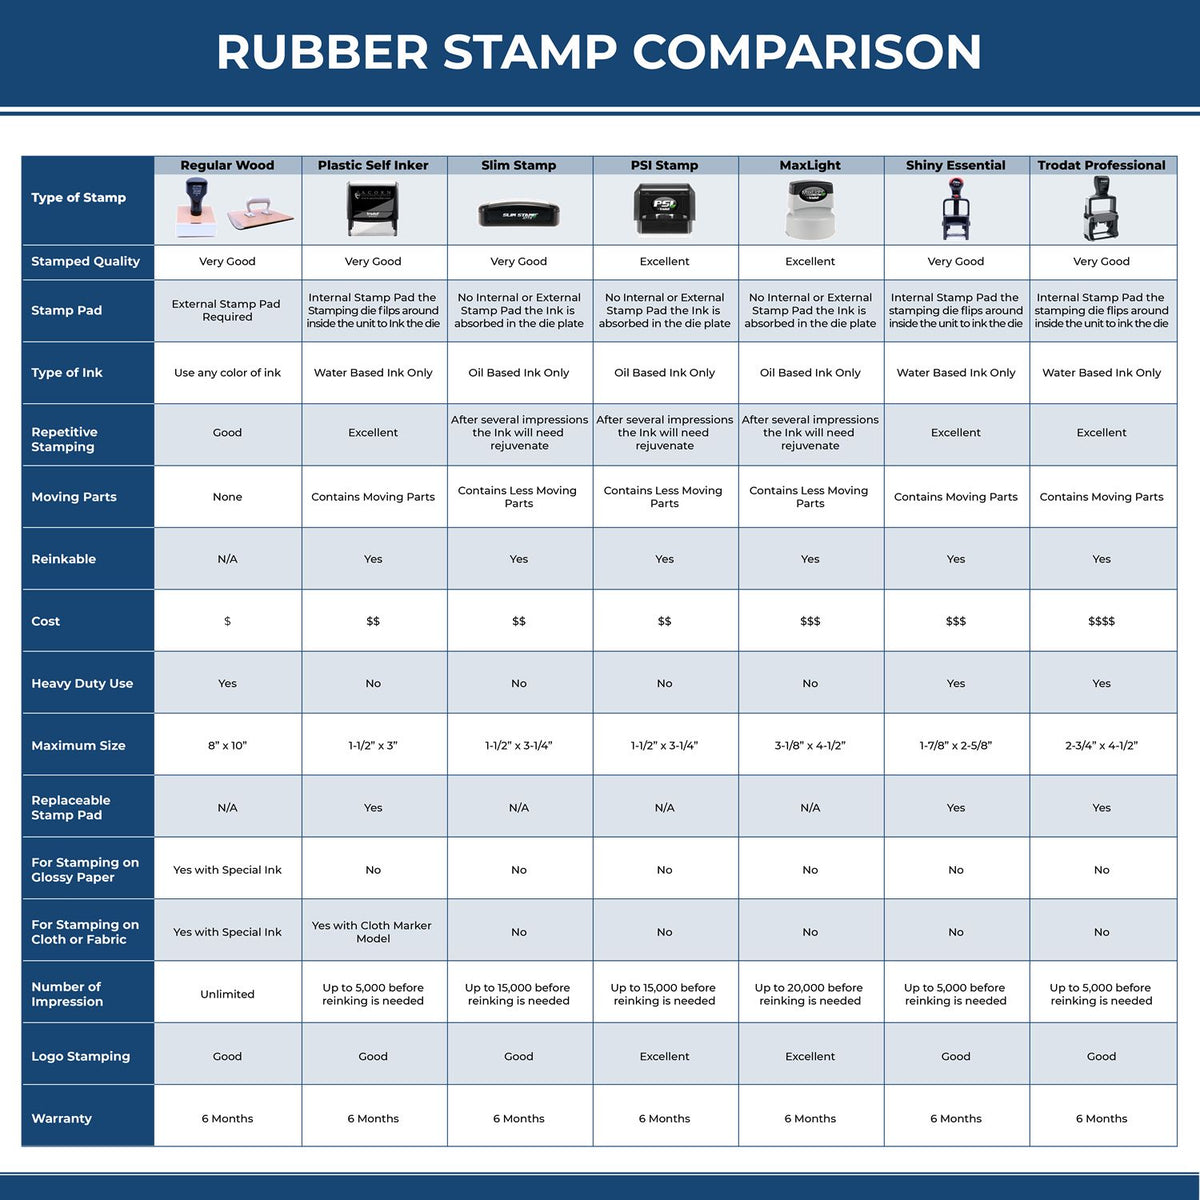 Bold Admitted Rubber Stamp 4072R Rubber Stamp Comparison